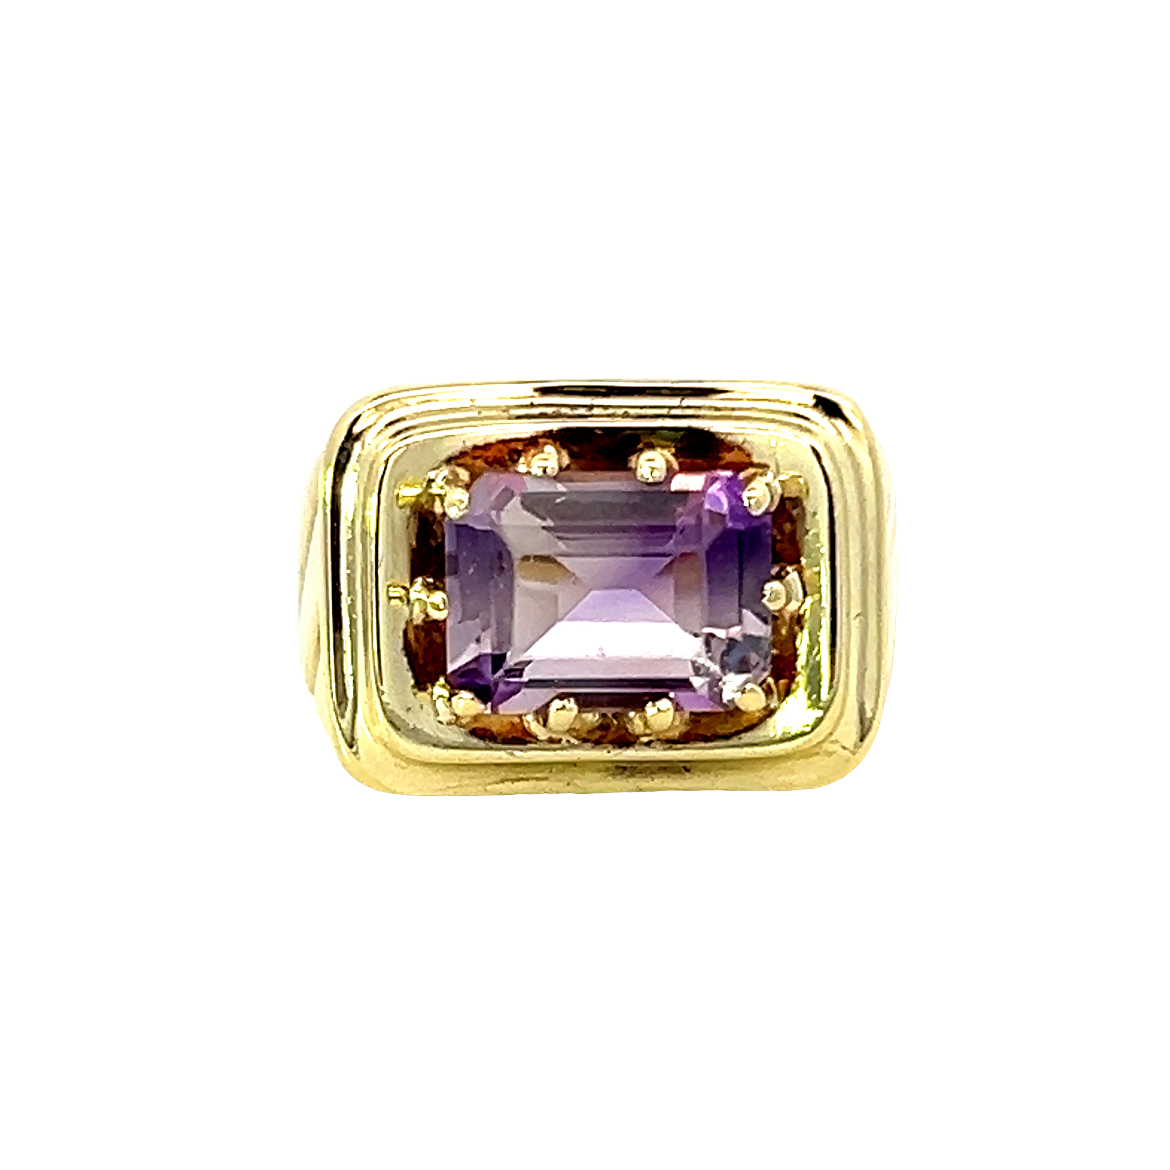 A Chunky Gold Amethyst Ring